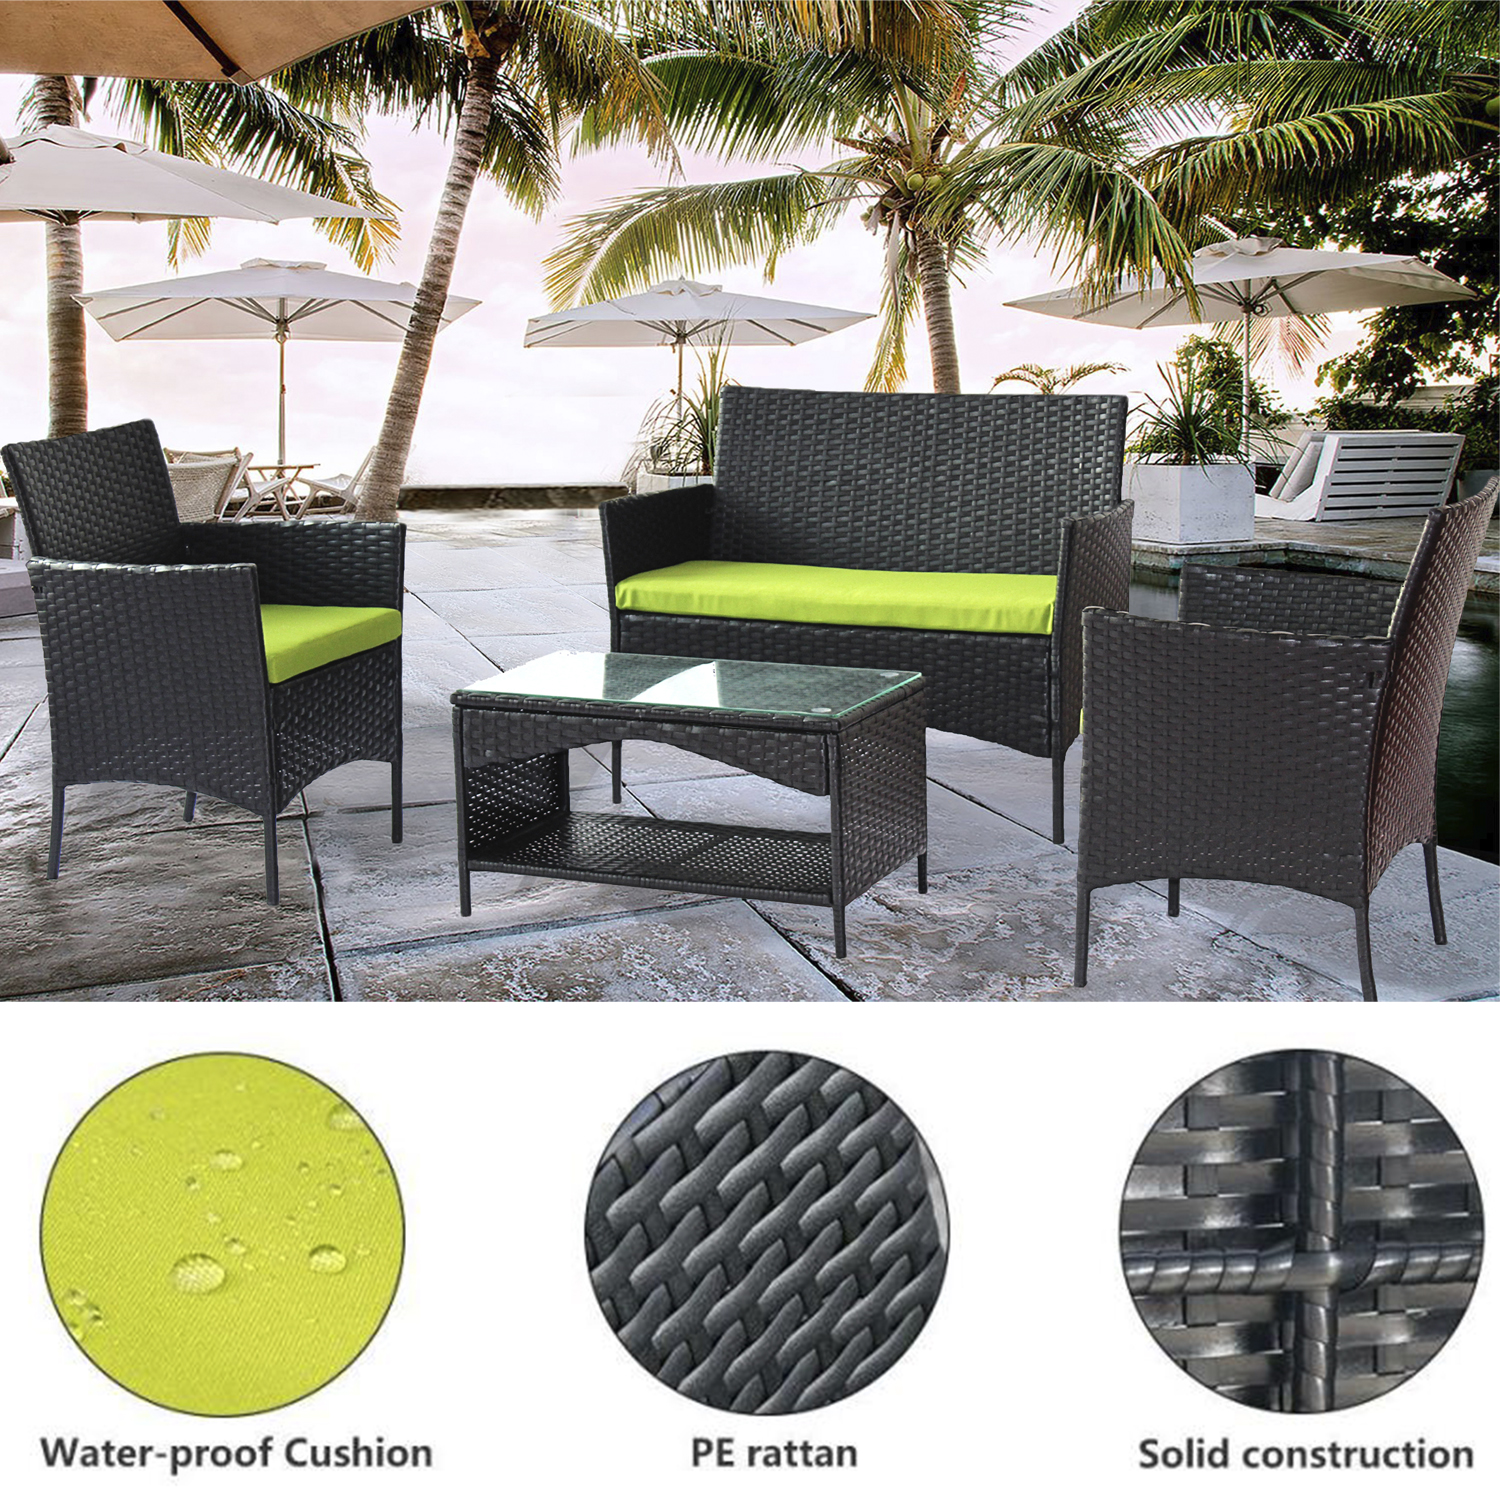 uhomepro 4 Piece Rattan Patio Furniture Set, Outdoor Wicker Conversation Dining Bar Sets with 2pcs Arm Chairs 1pc Love Seat, Coffee Table, Green Cushions for Backyard Poolside Garden - image 4 of 8